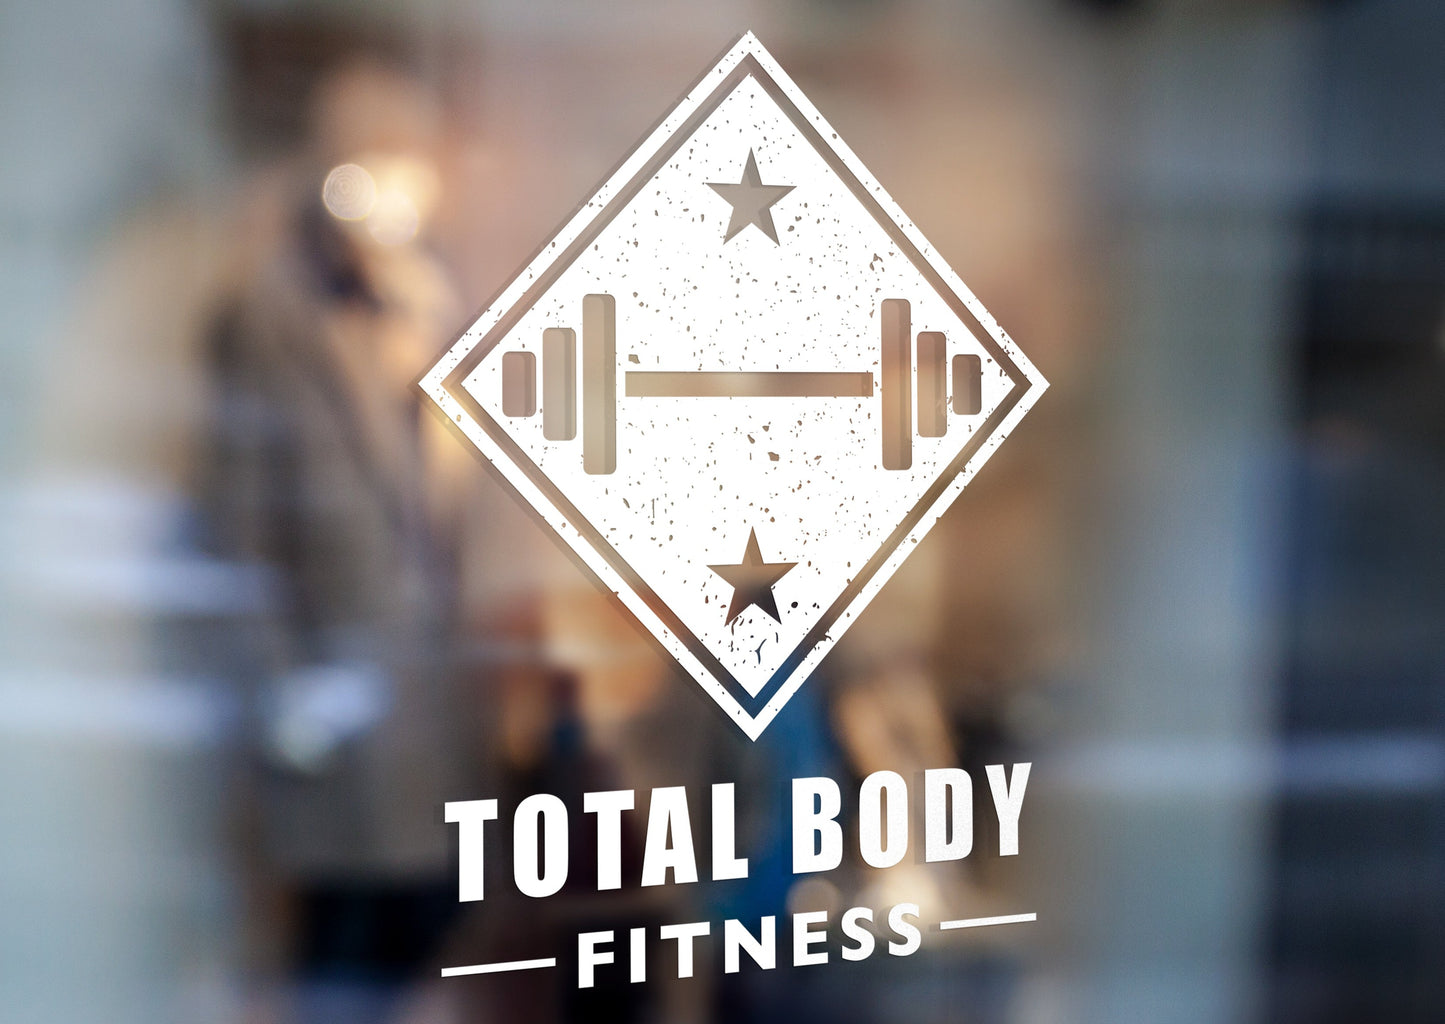 Fitness Logo | Fitness Trainer | Personal Trainer Logo | Logo Design | Gym | Cross Fit | Weights | Barbell Design